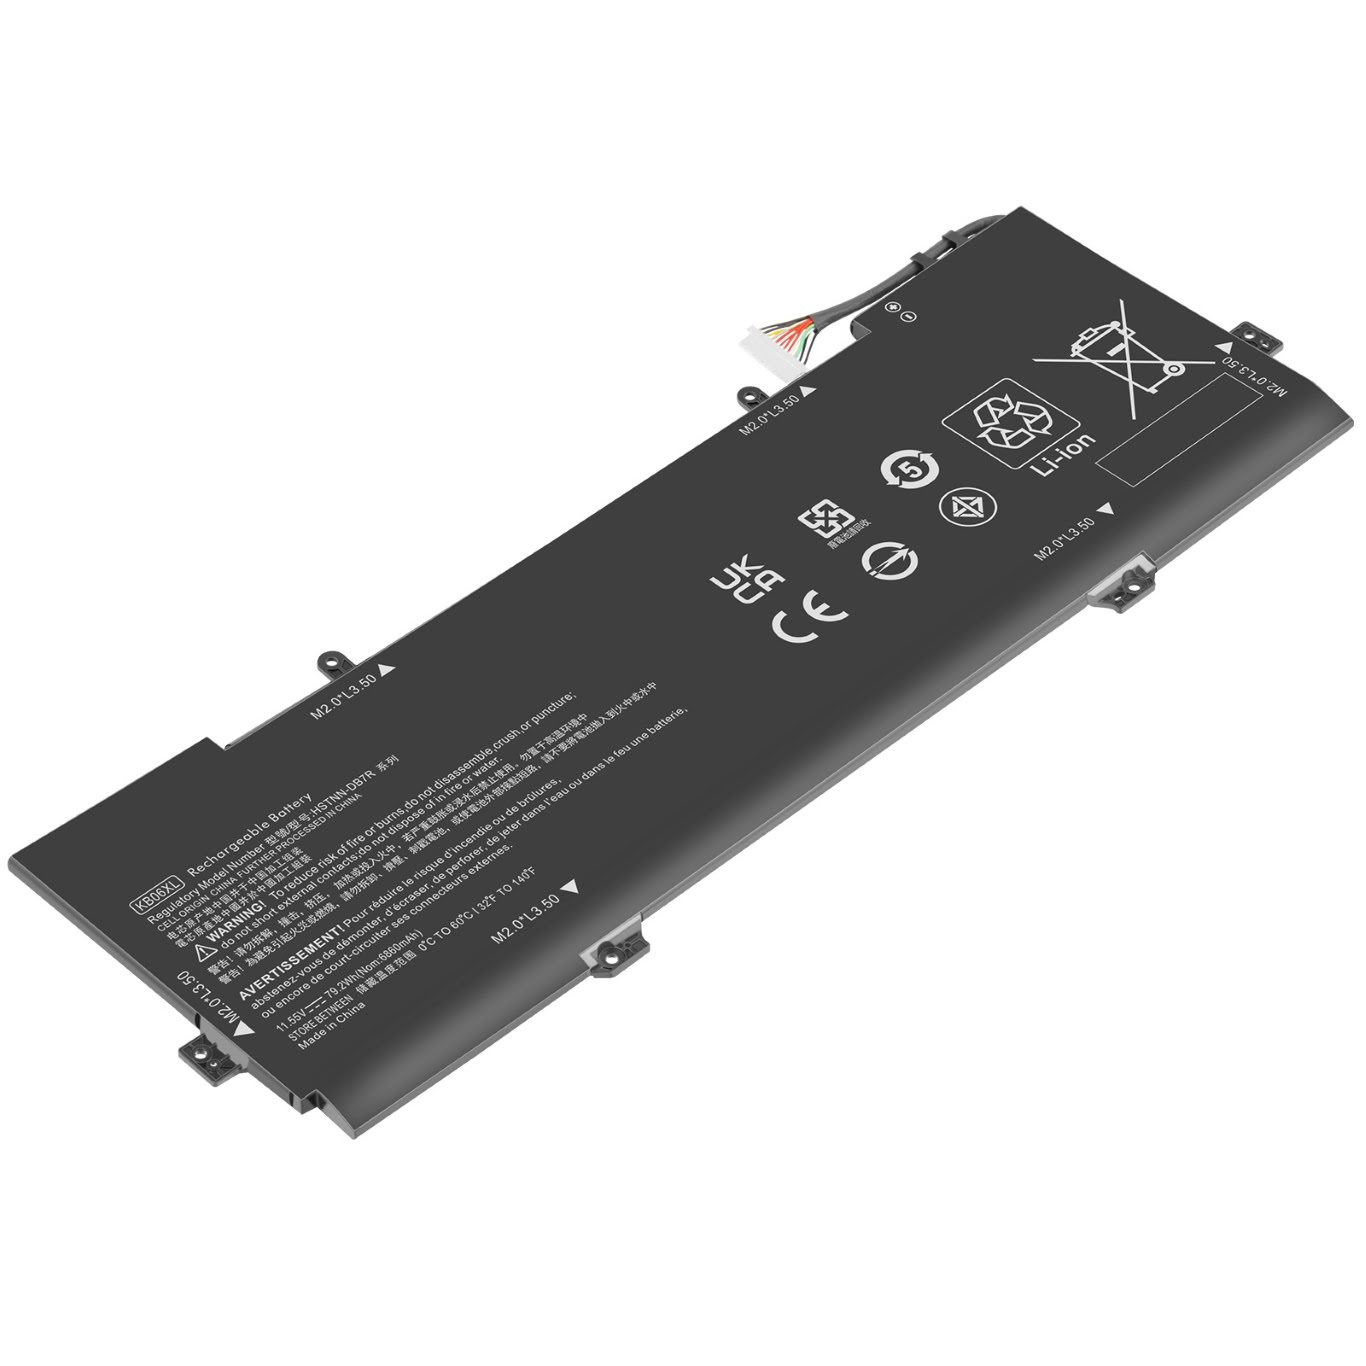 902401-2C1, 902499-855 replacement Laptop Battery for HP Spectre x360 15-bl001ng, Spectre x360 15-bl002xx, 6 cells, 11.55v, 6860mah/79.2wh